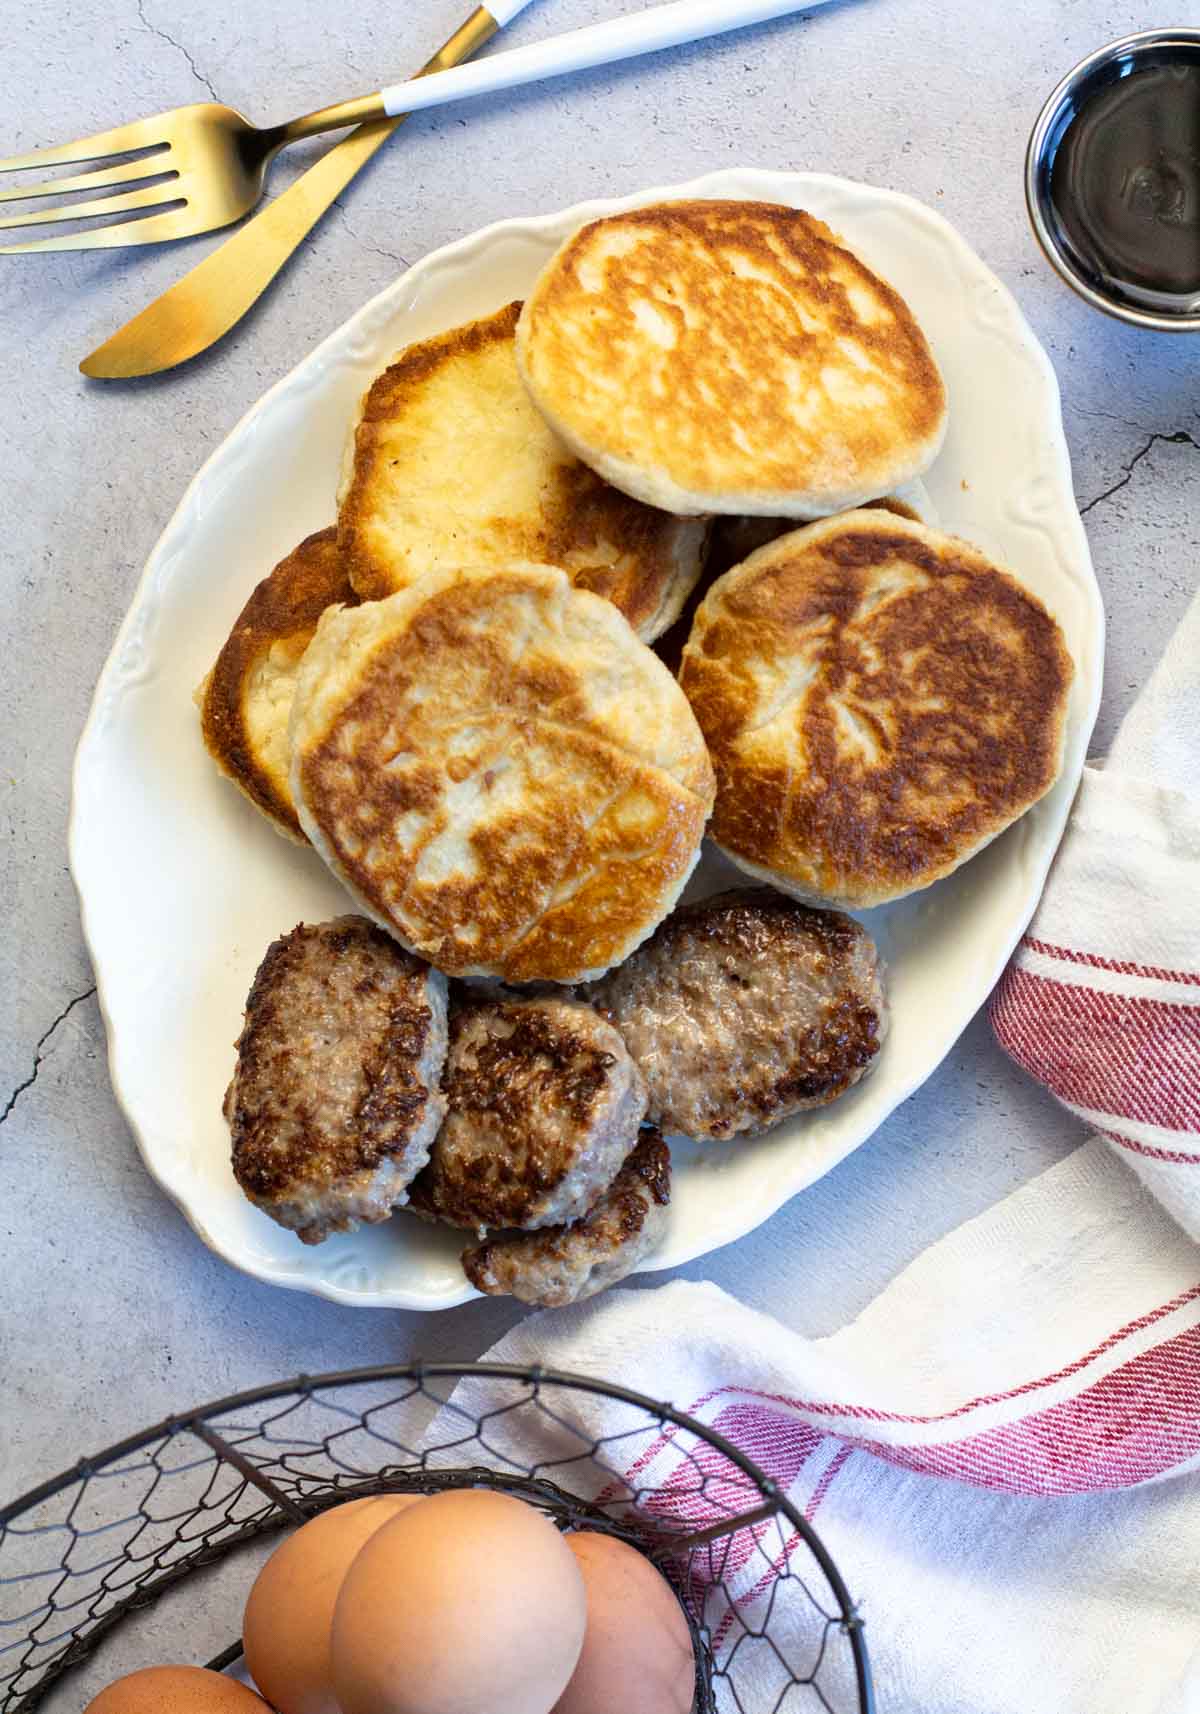 A platter of pan fried biscuits with sausage patties.